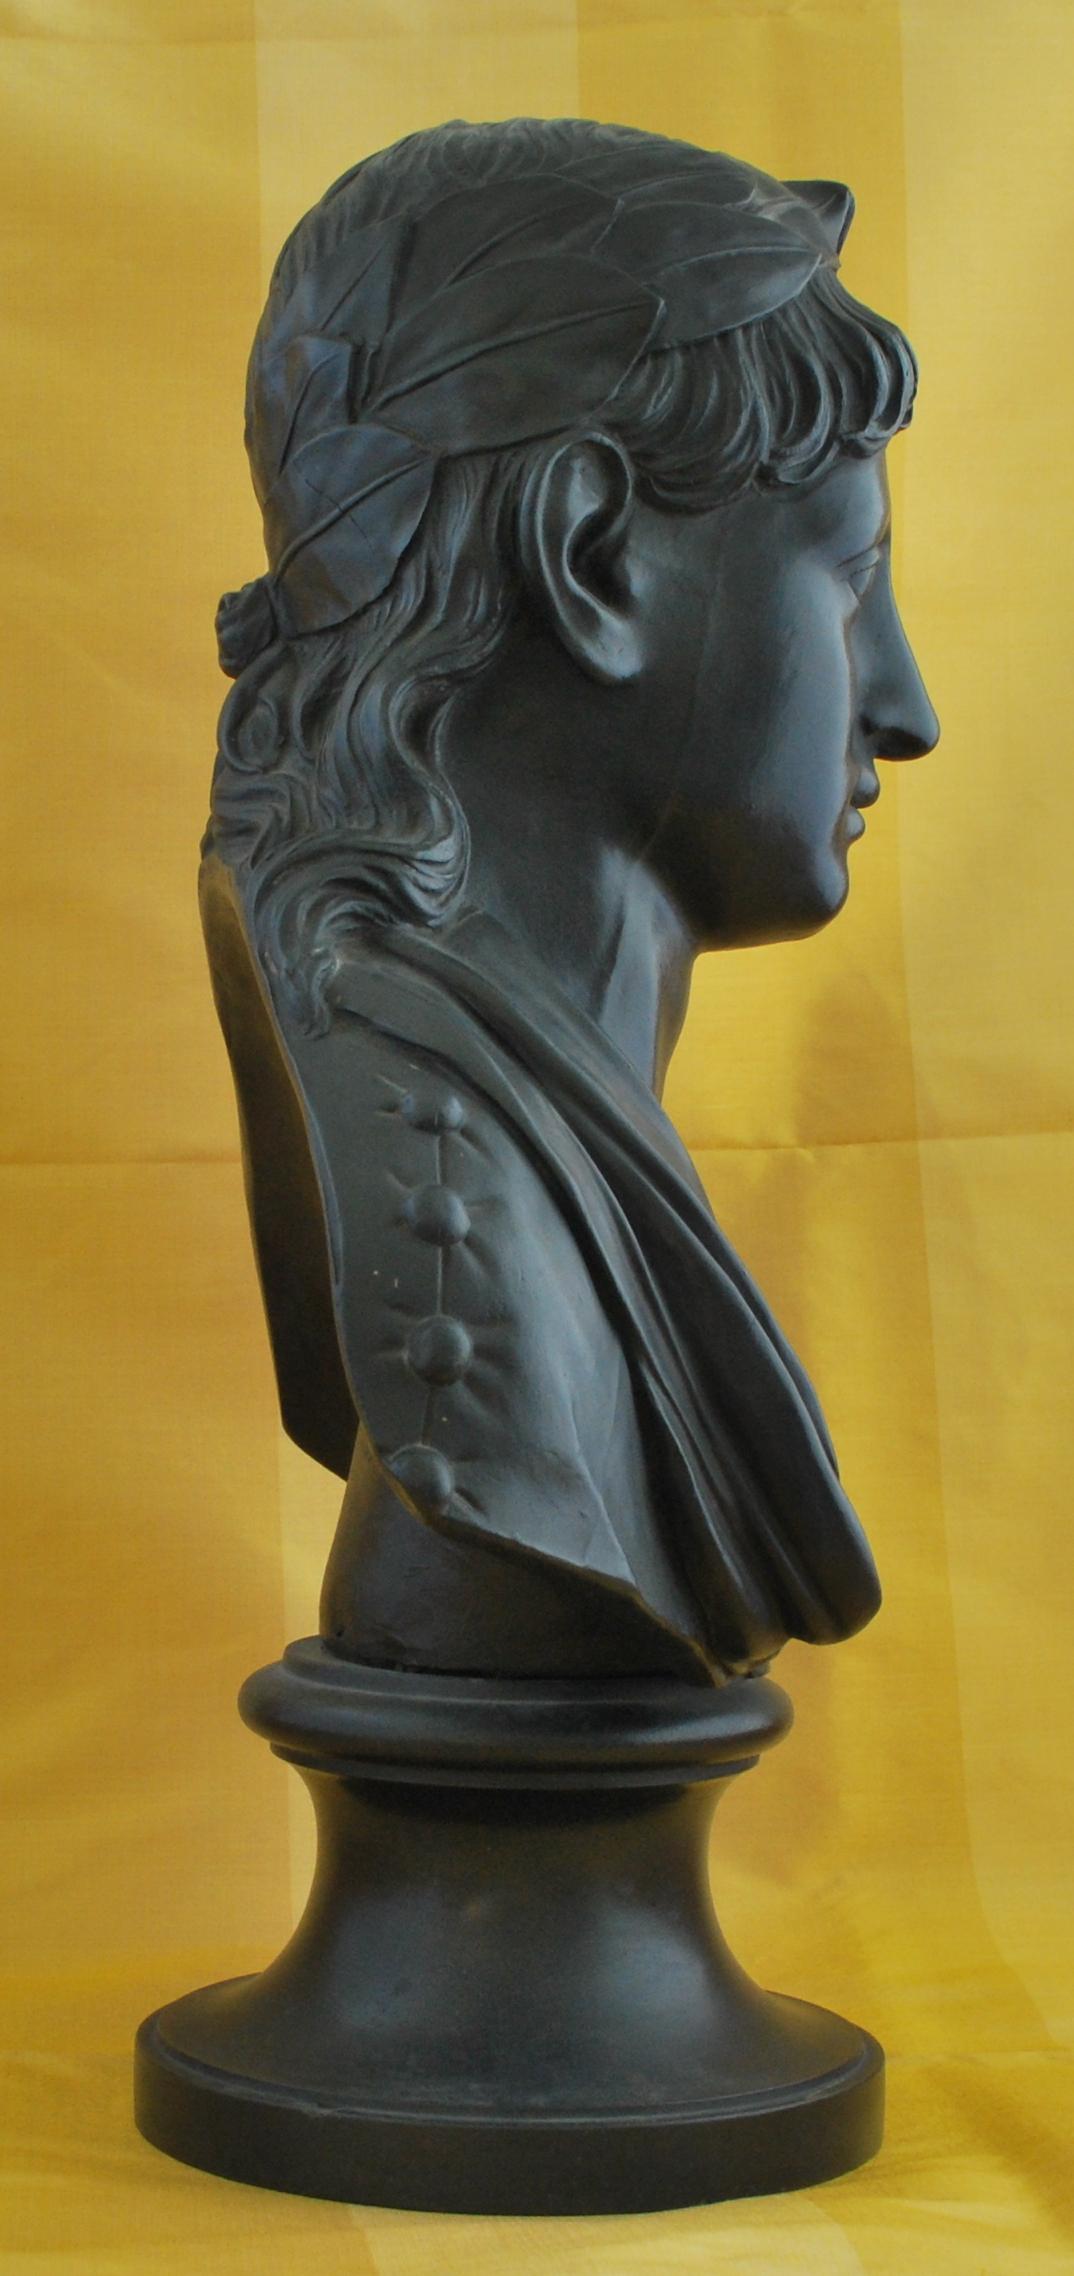 A black basalt bust of this important Roman poet; and of course an important figure in The Divine Comedy.

The modelling is particularly fine in this example.